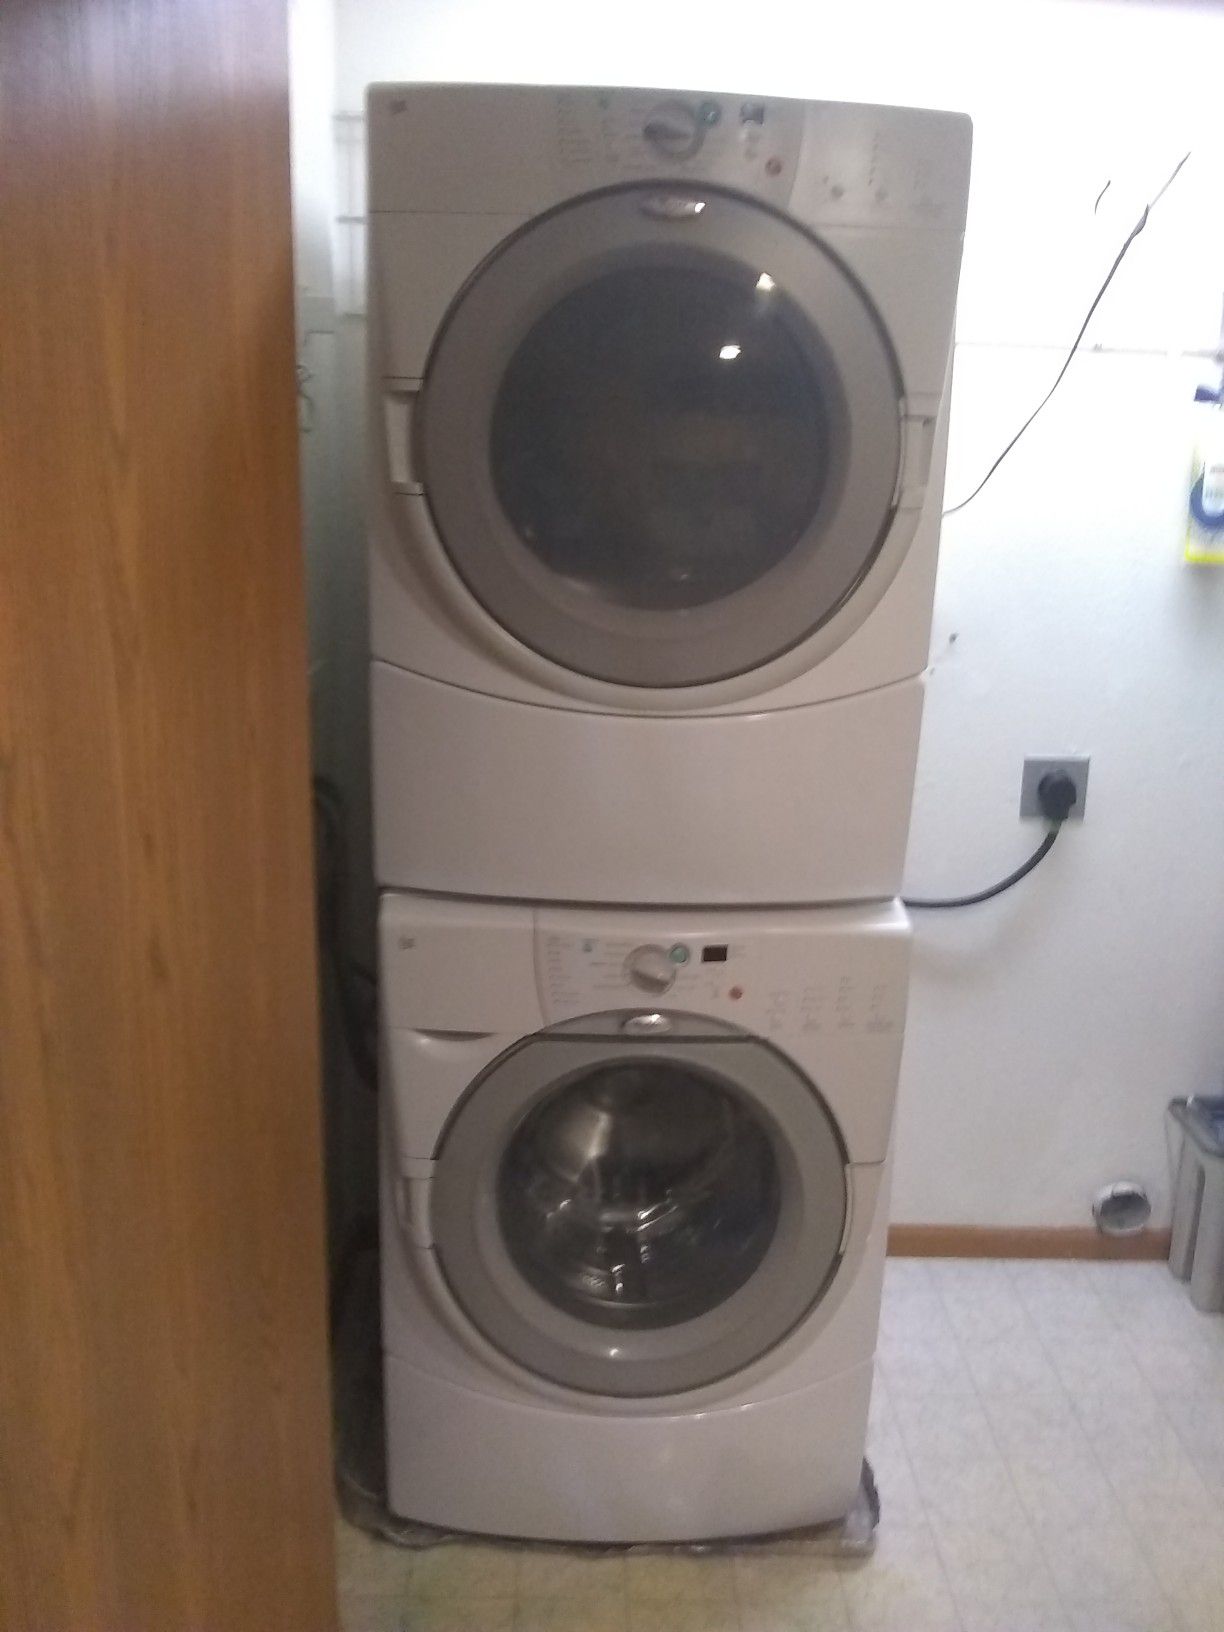 Whirlpool duet front-load dryer and free washer